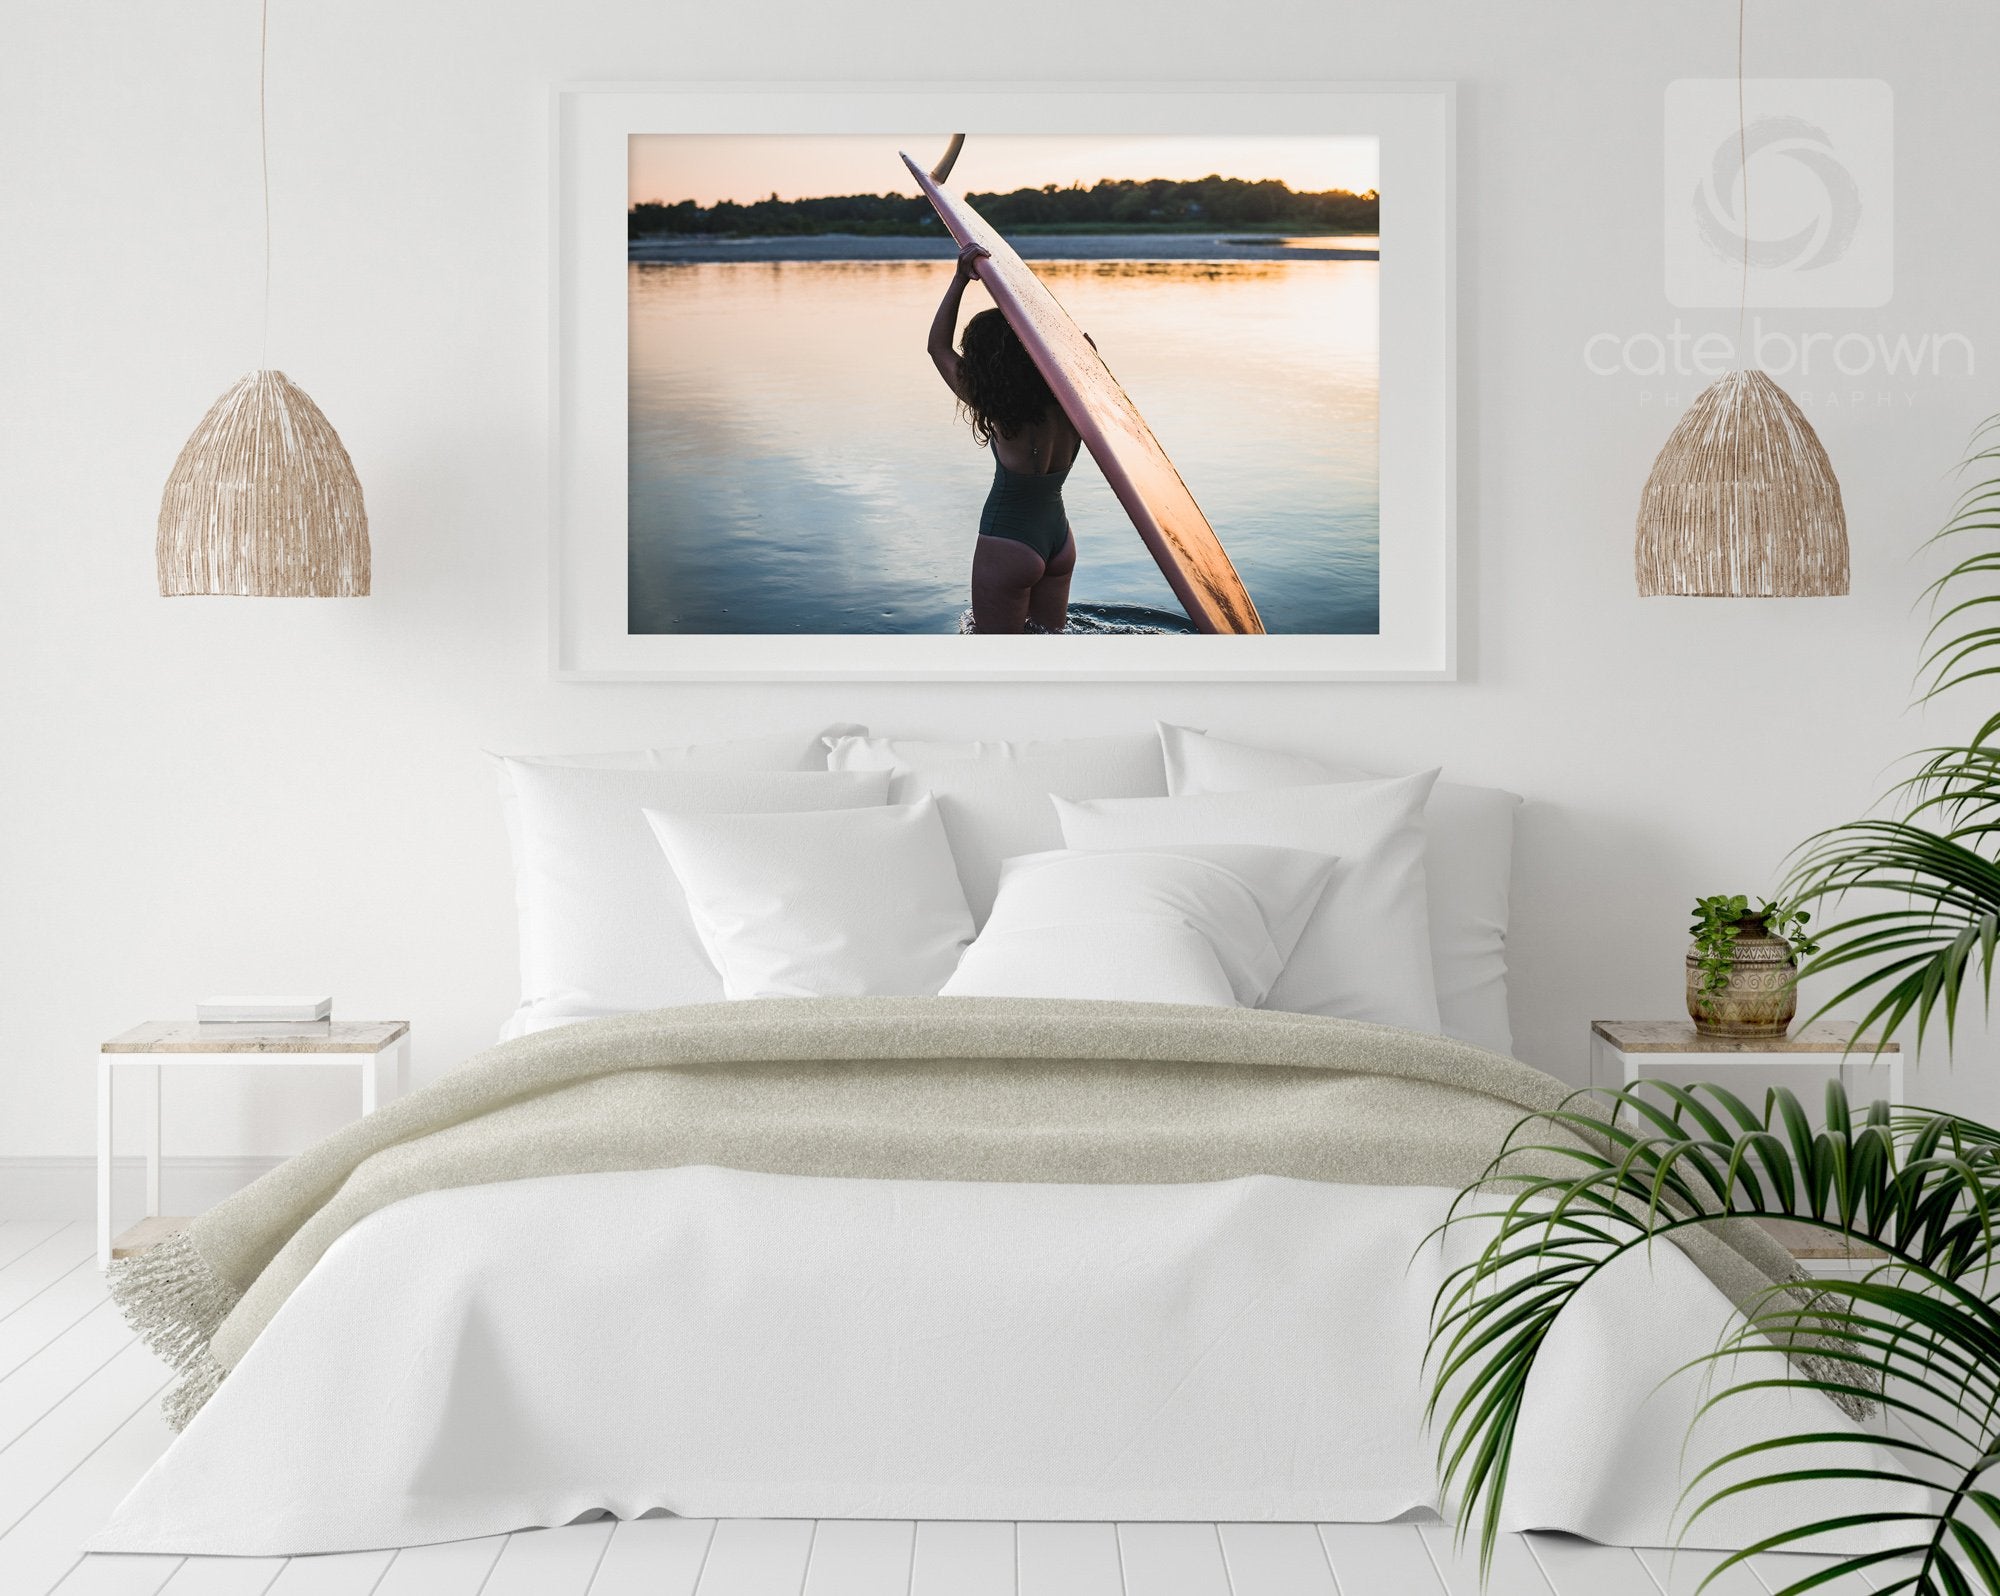 Cate Brown Photo Femme Sunset  //  Surf Photography Made to Order Ocean Fine Art